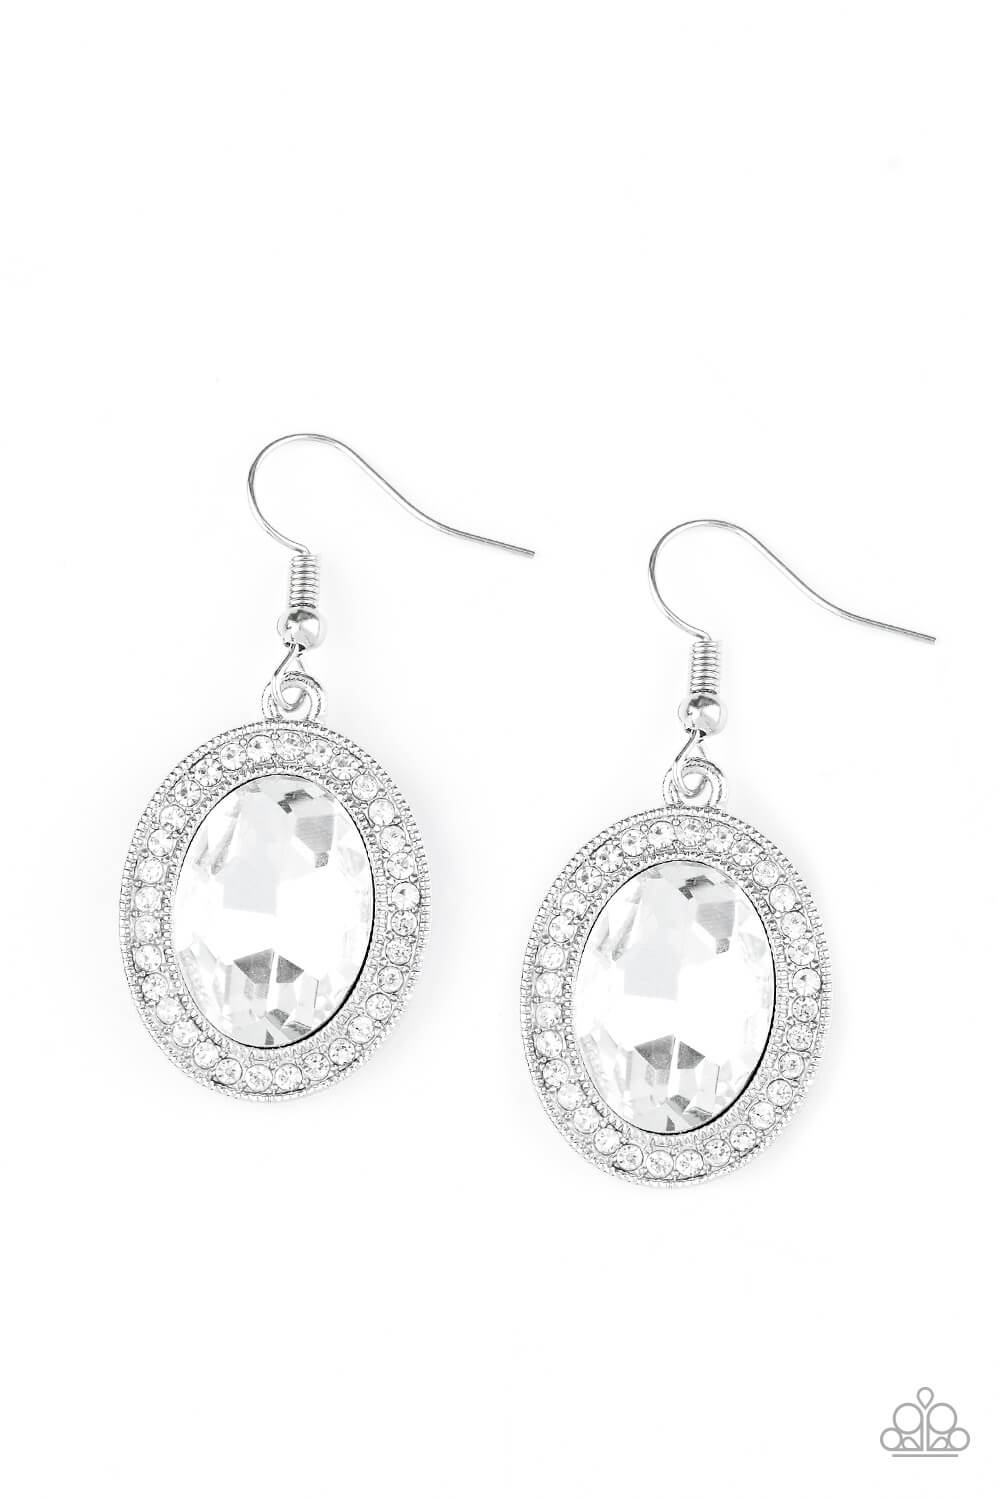 Only FAME In Town - White Earrings - Princess Glam Shop